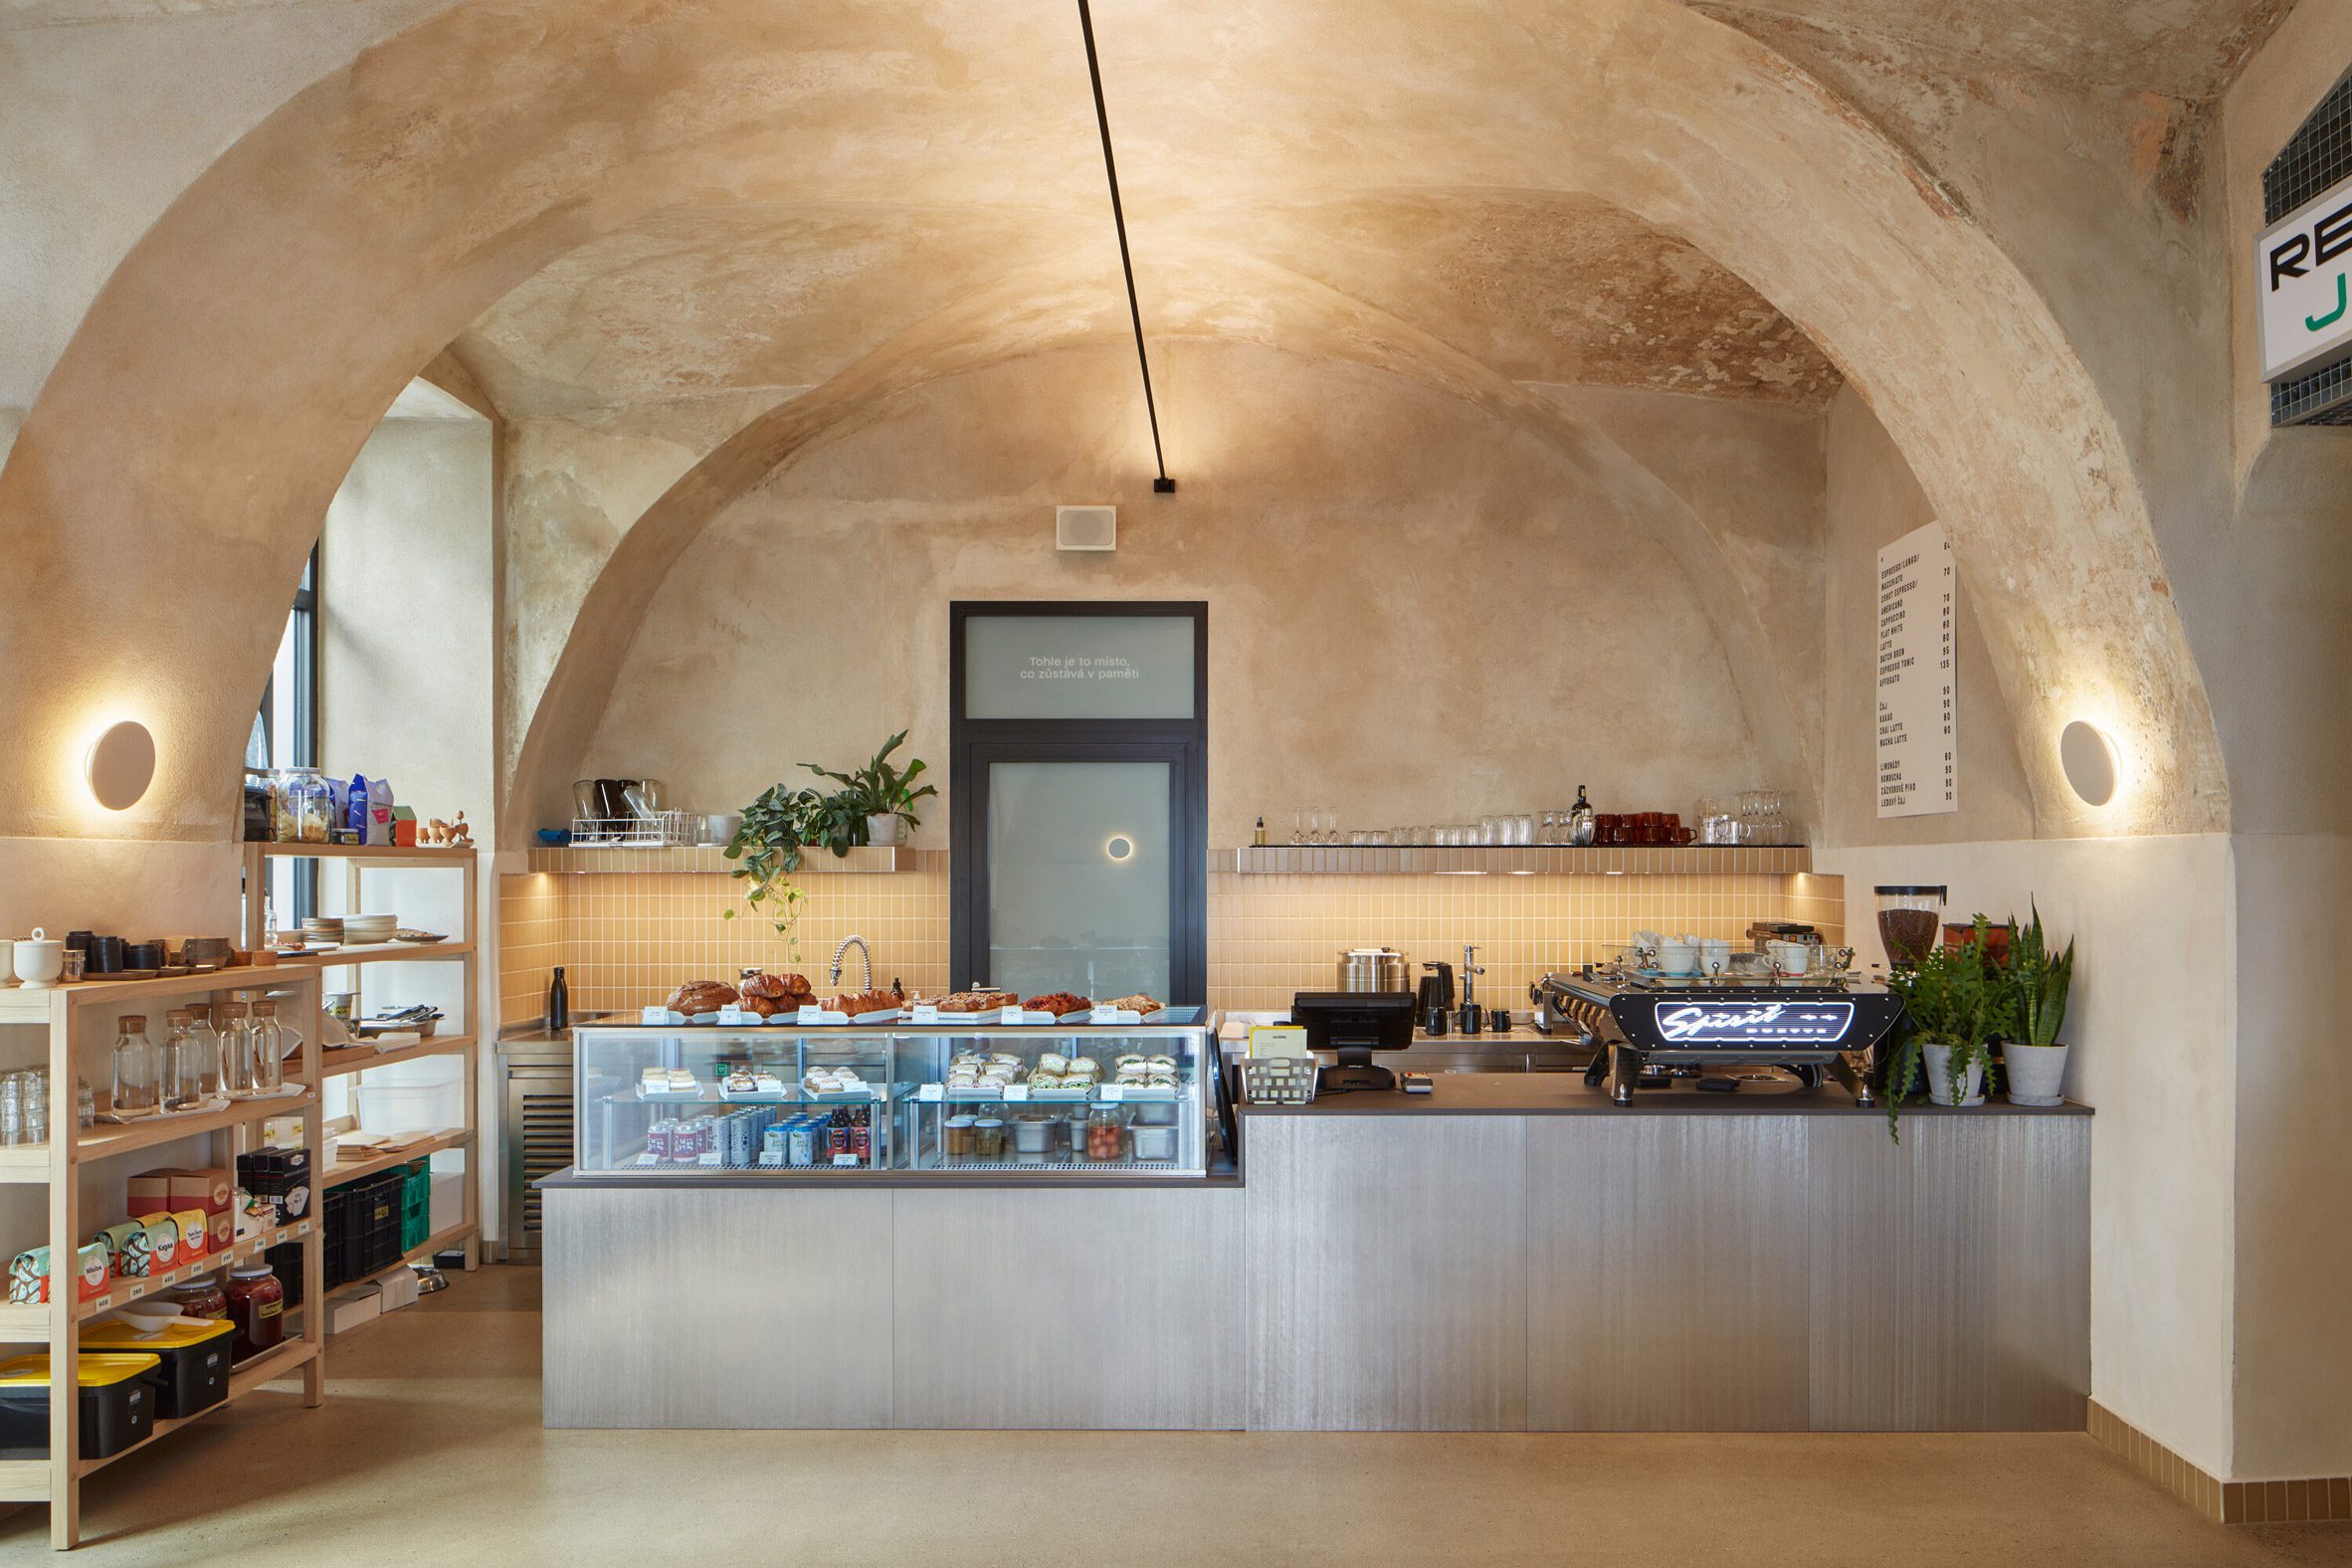 Bakery interior with vaulted ceiling